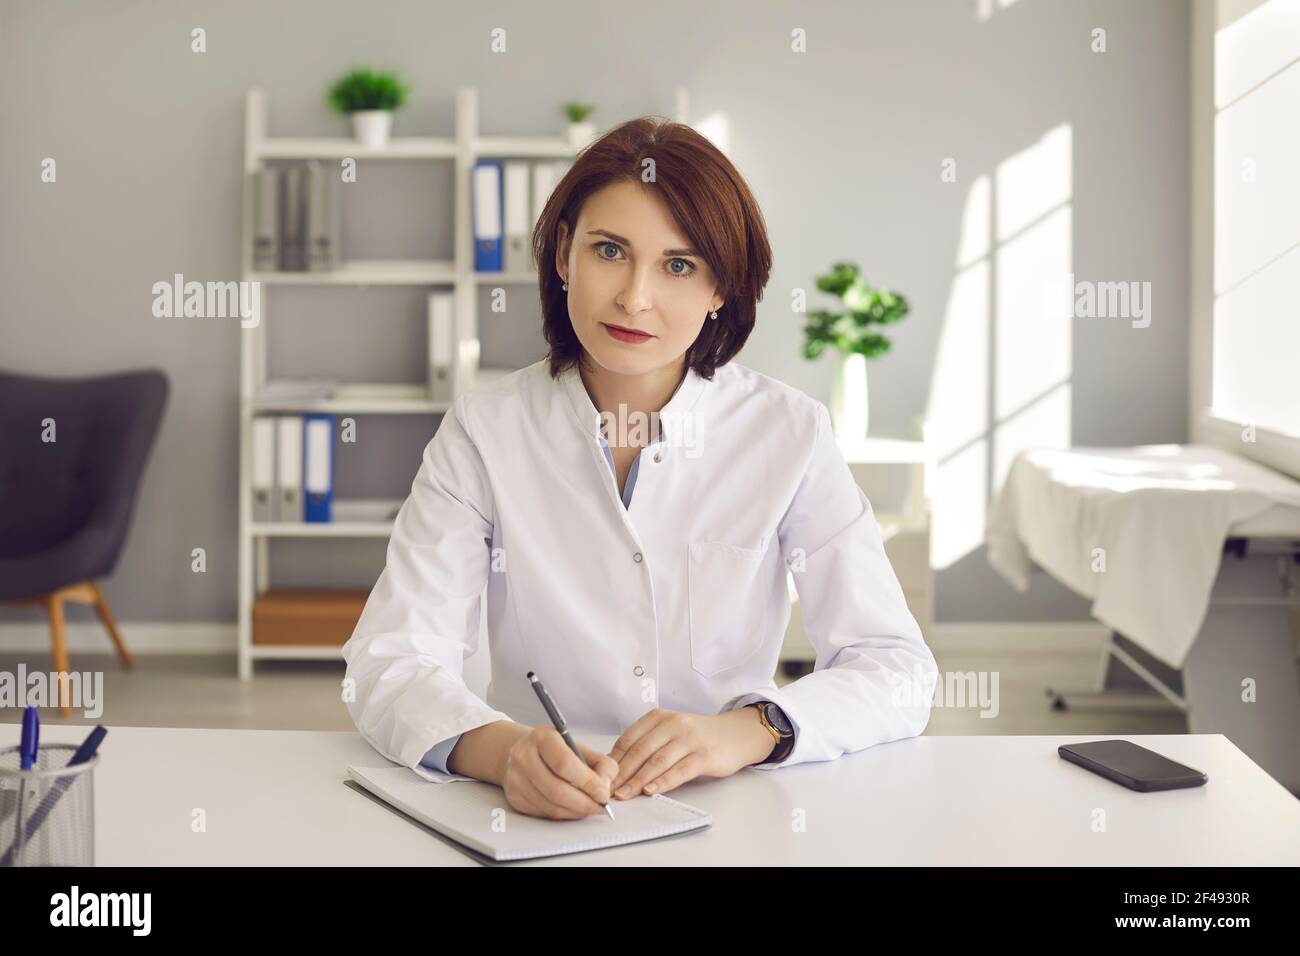 Female doctor writes notes during a video conference or listening to medical online training. Stock Photo